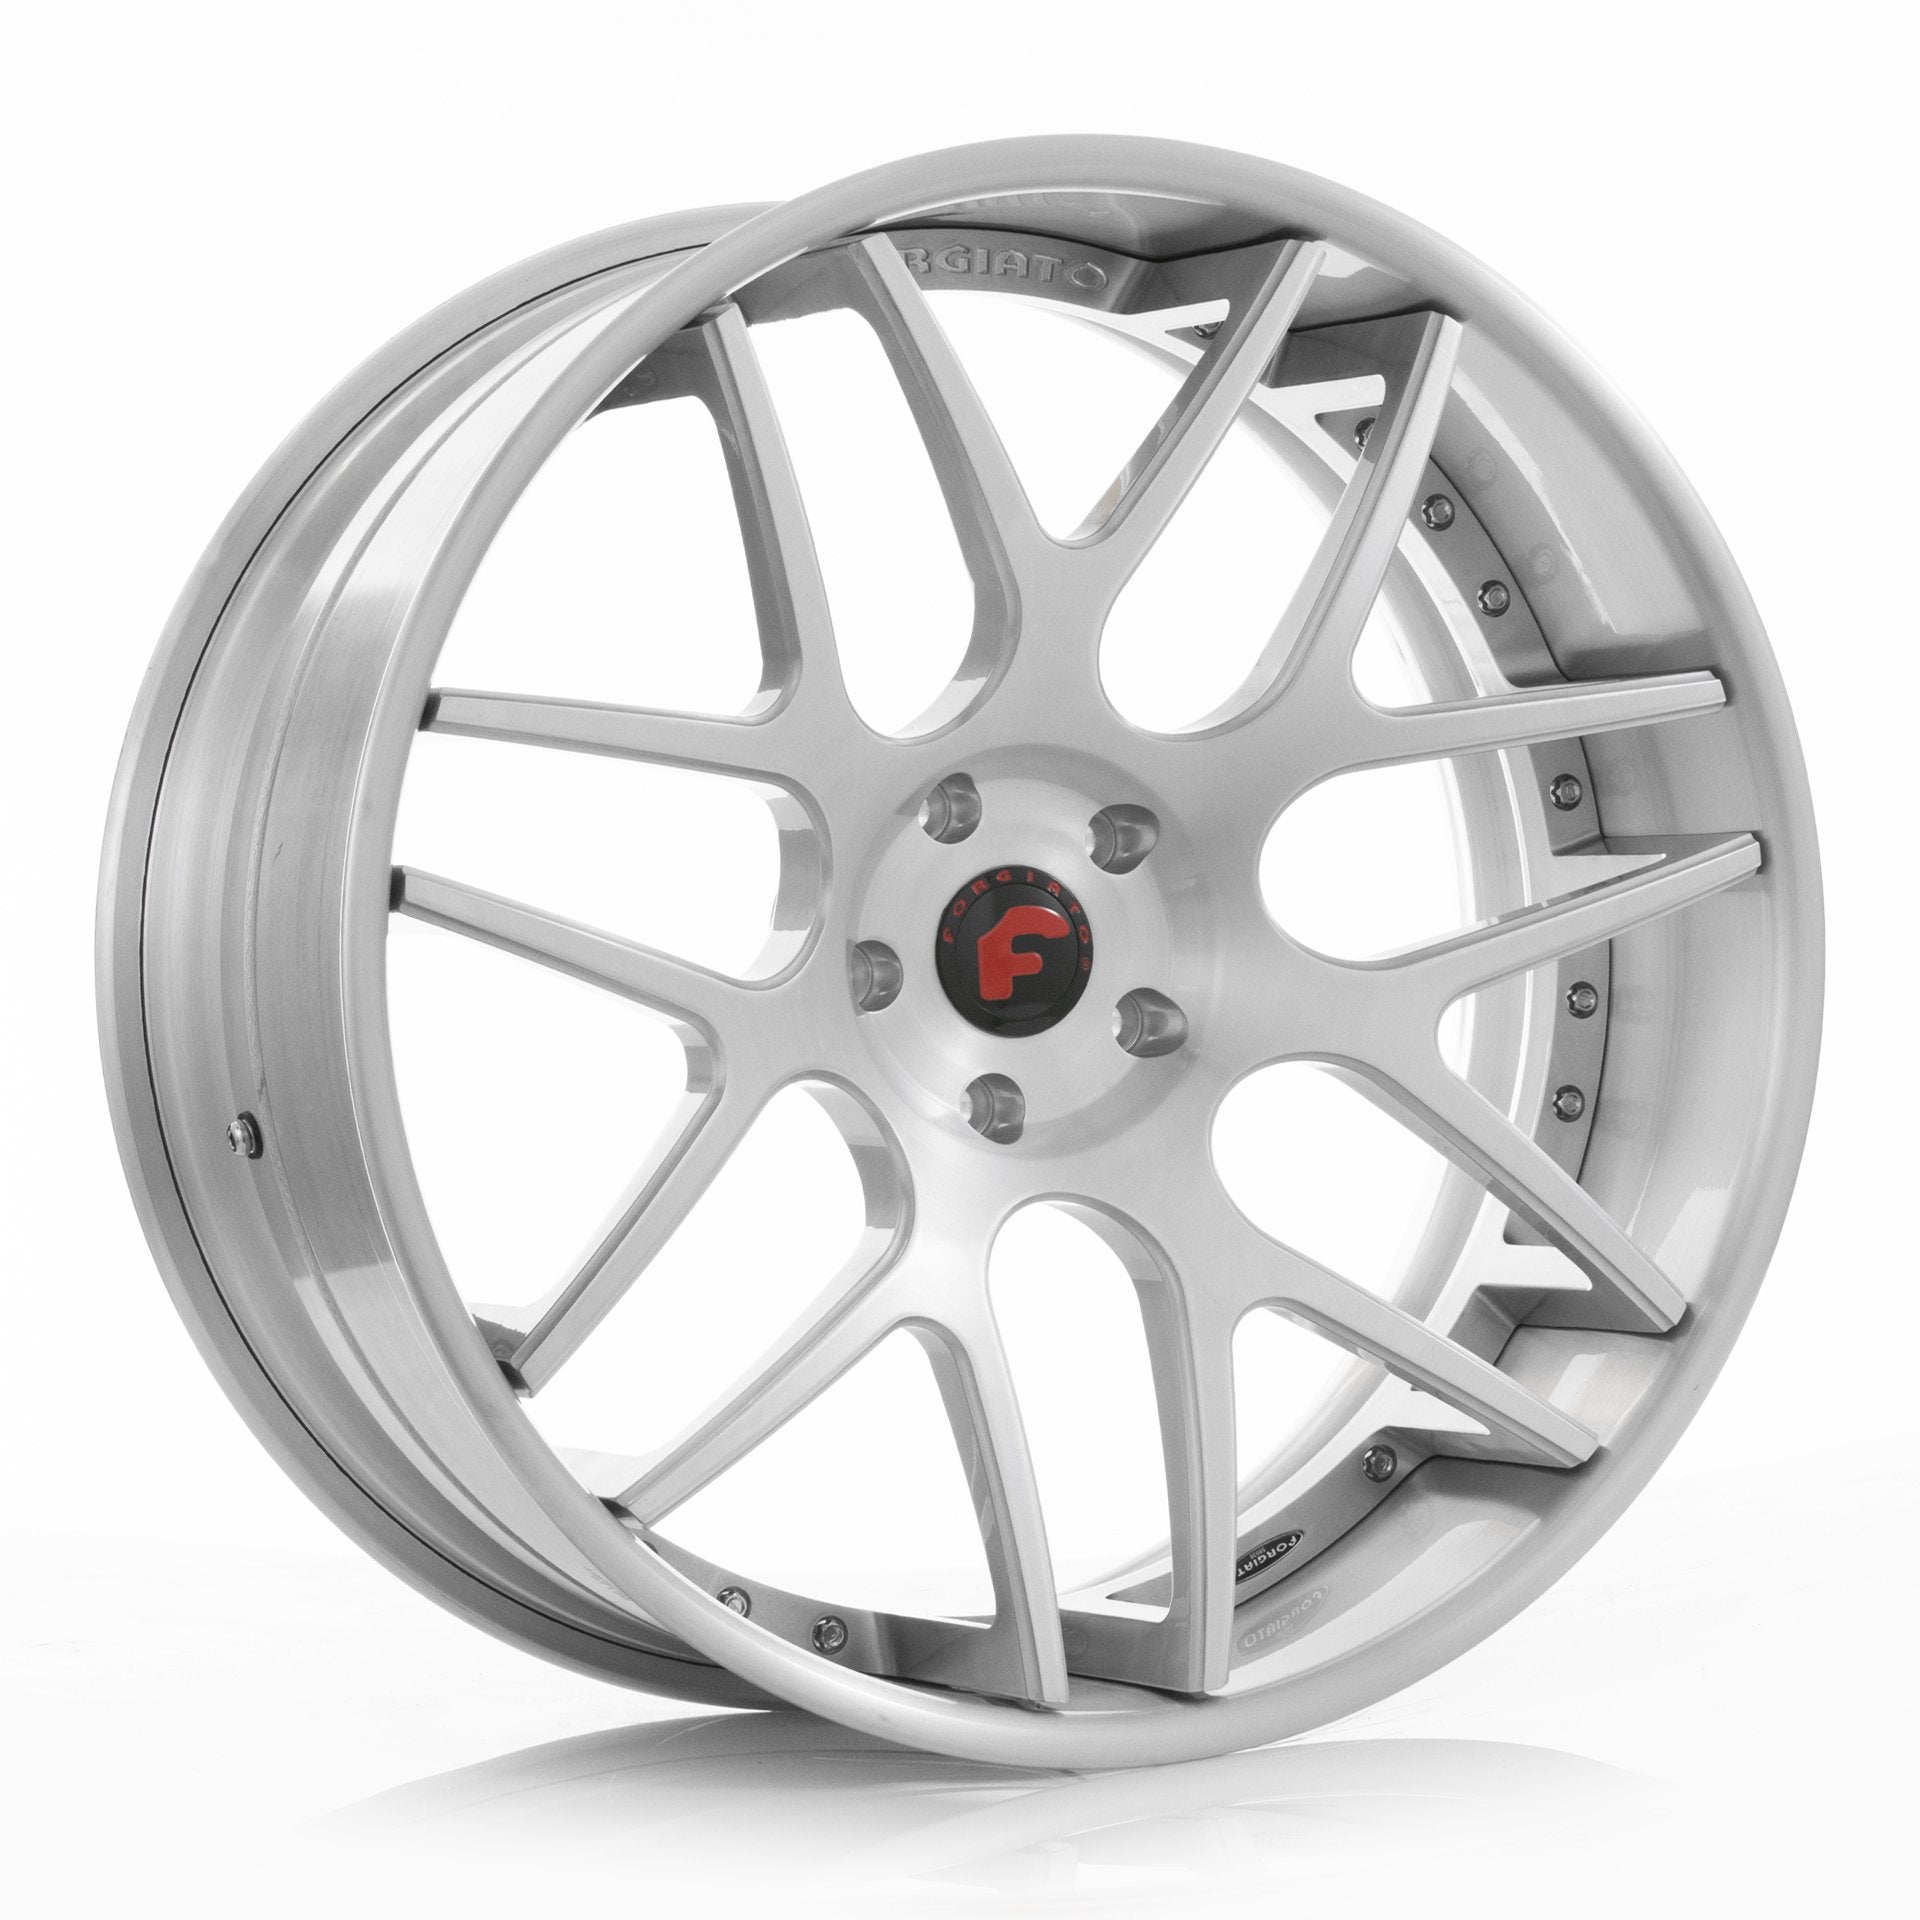 24" Set of S202-ECL for Mercedes G63 (ECL Forging) - Wheels | Rims